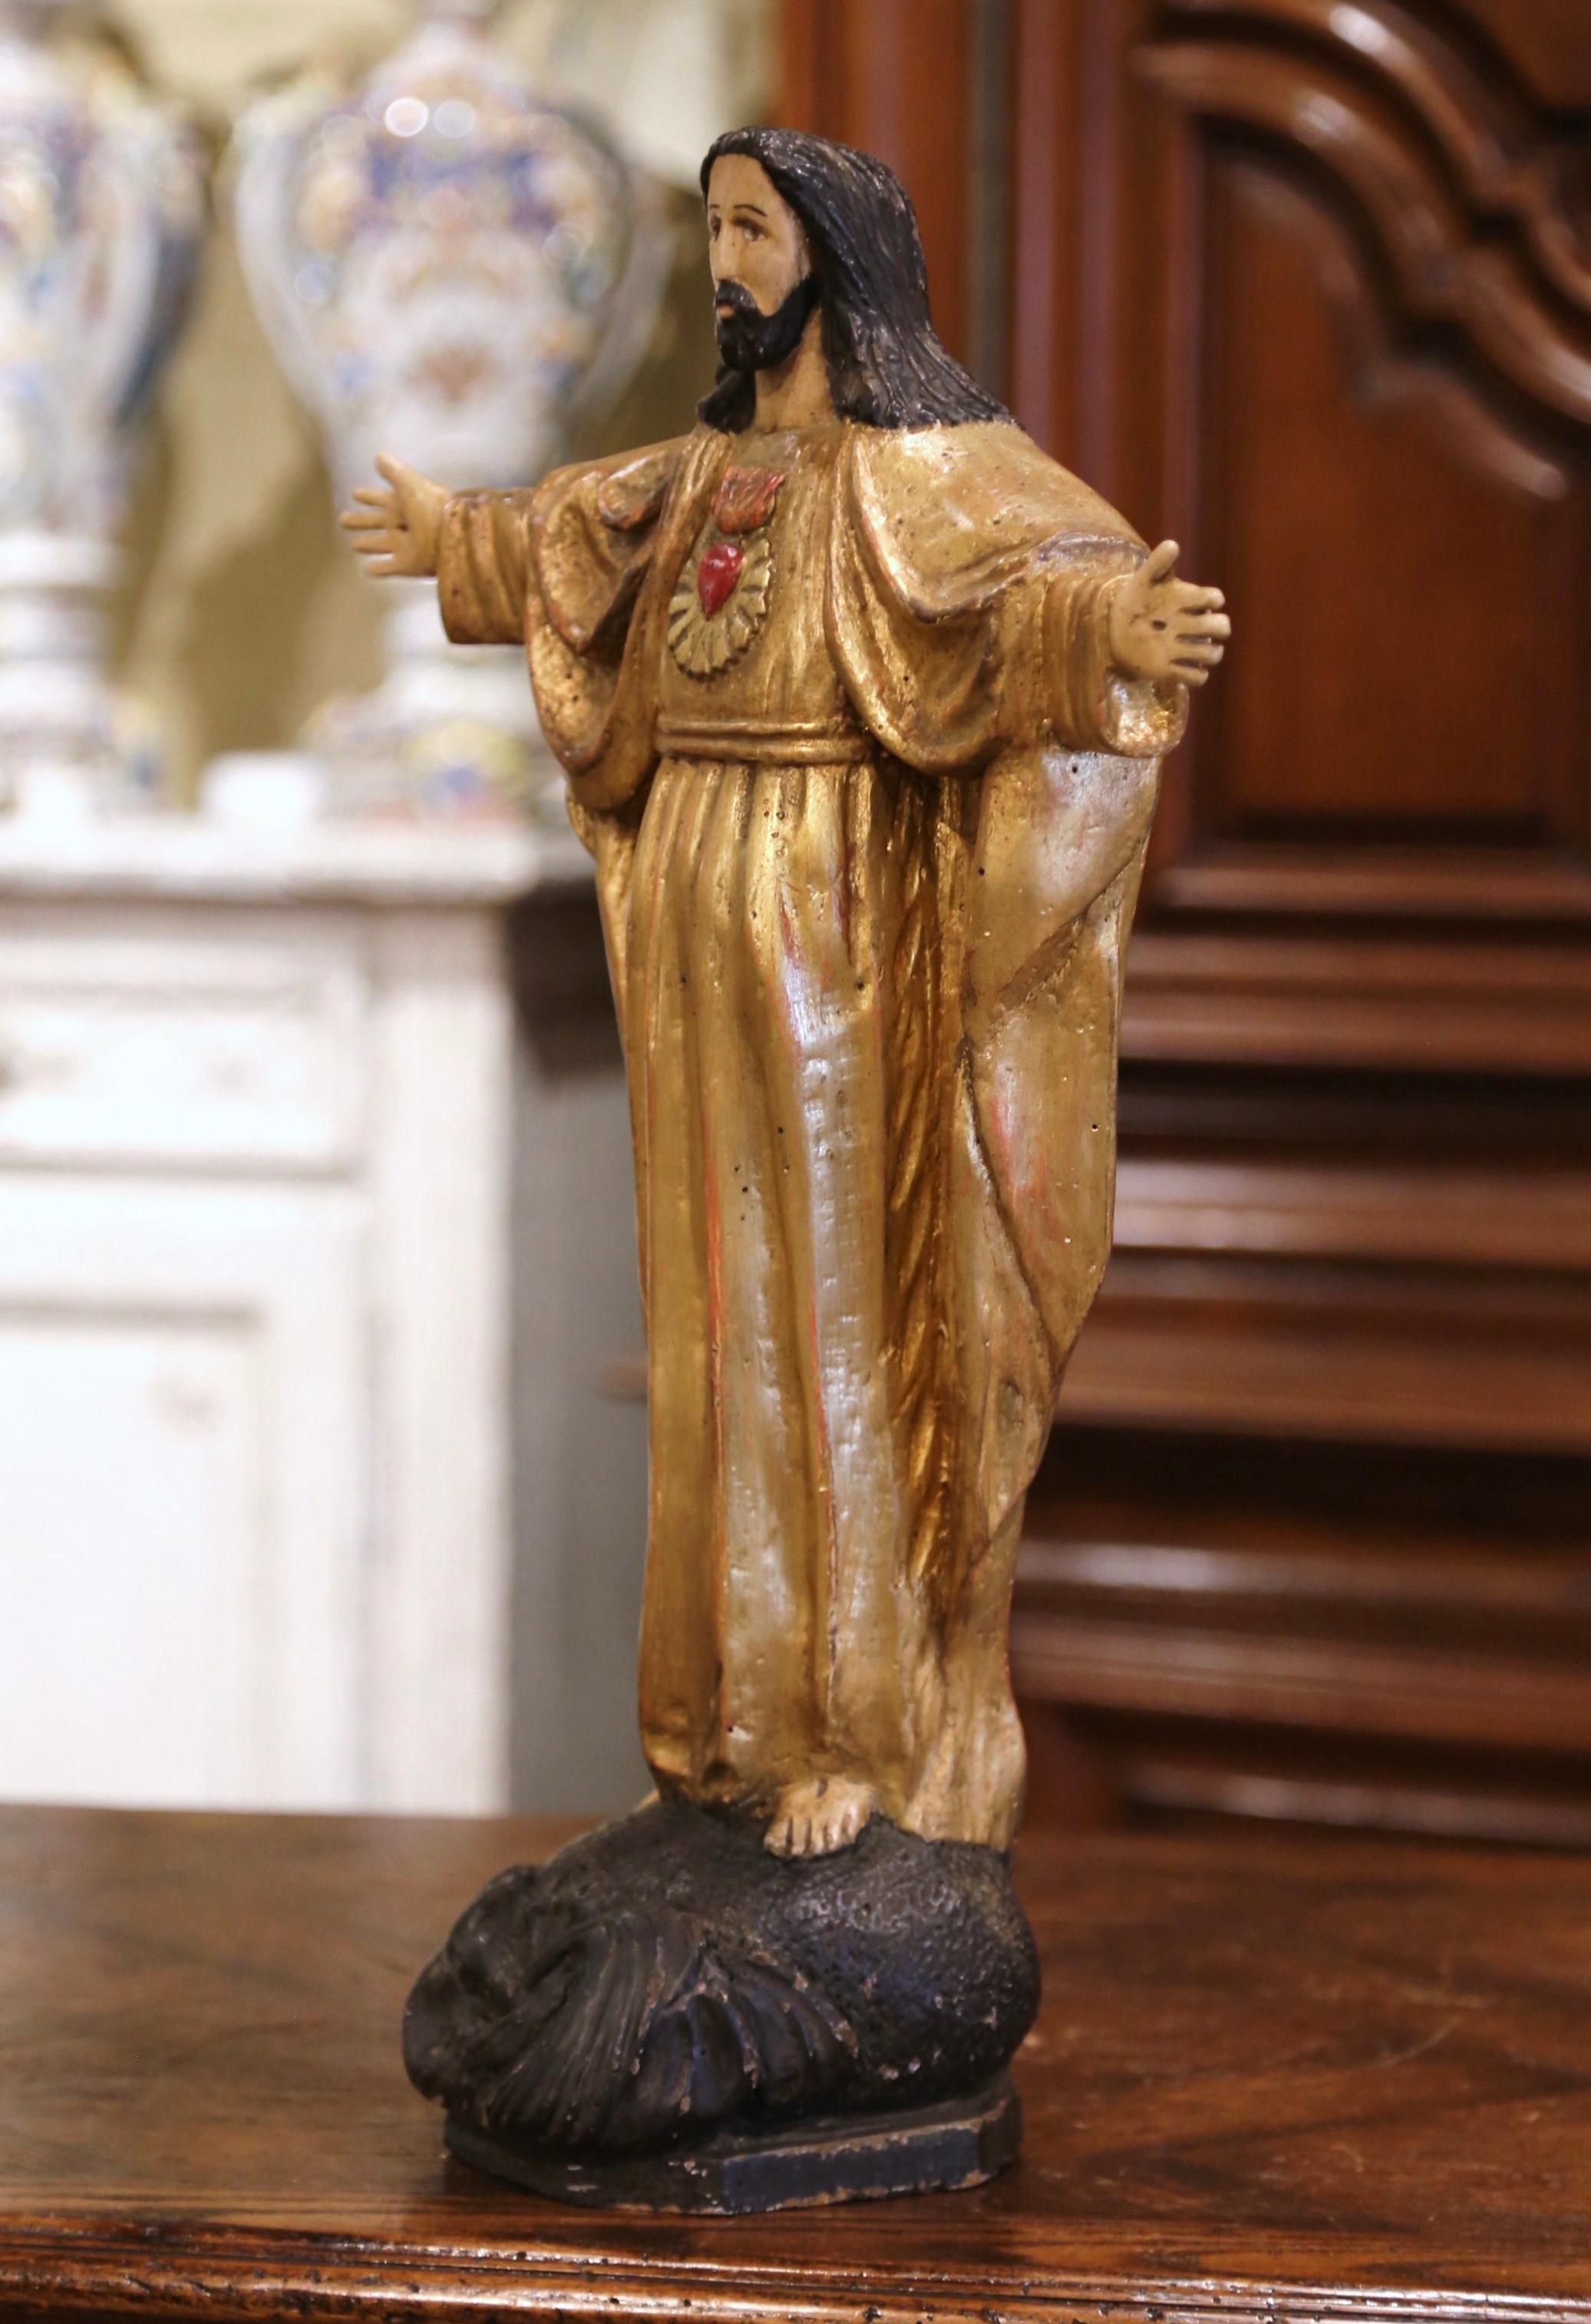 This beautiful antique Christ statue was hand carved in Spain, circa 1790. On a wooden base resembling rock with carved motifs, the sculpture depicts our Lord Jesus Christ standing with open arms and pierced hands, showing his Sacred Heart. The